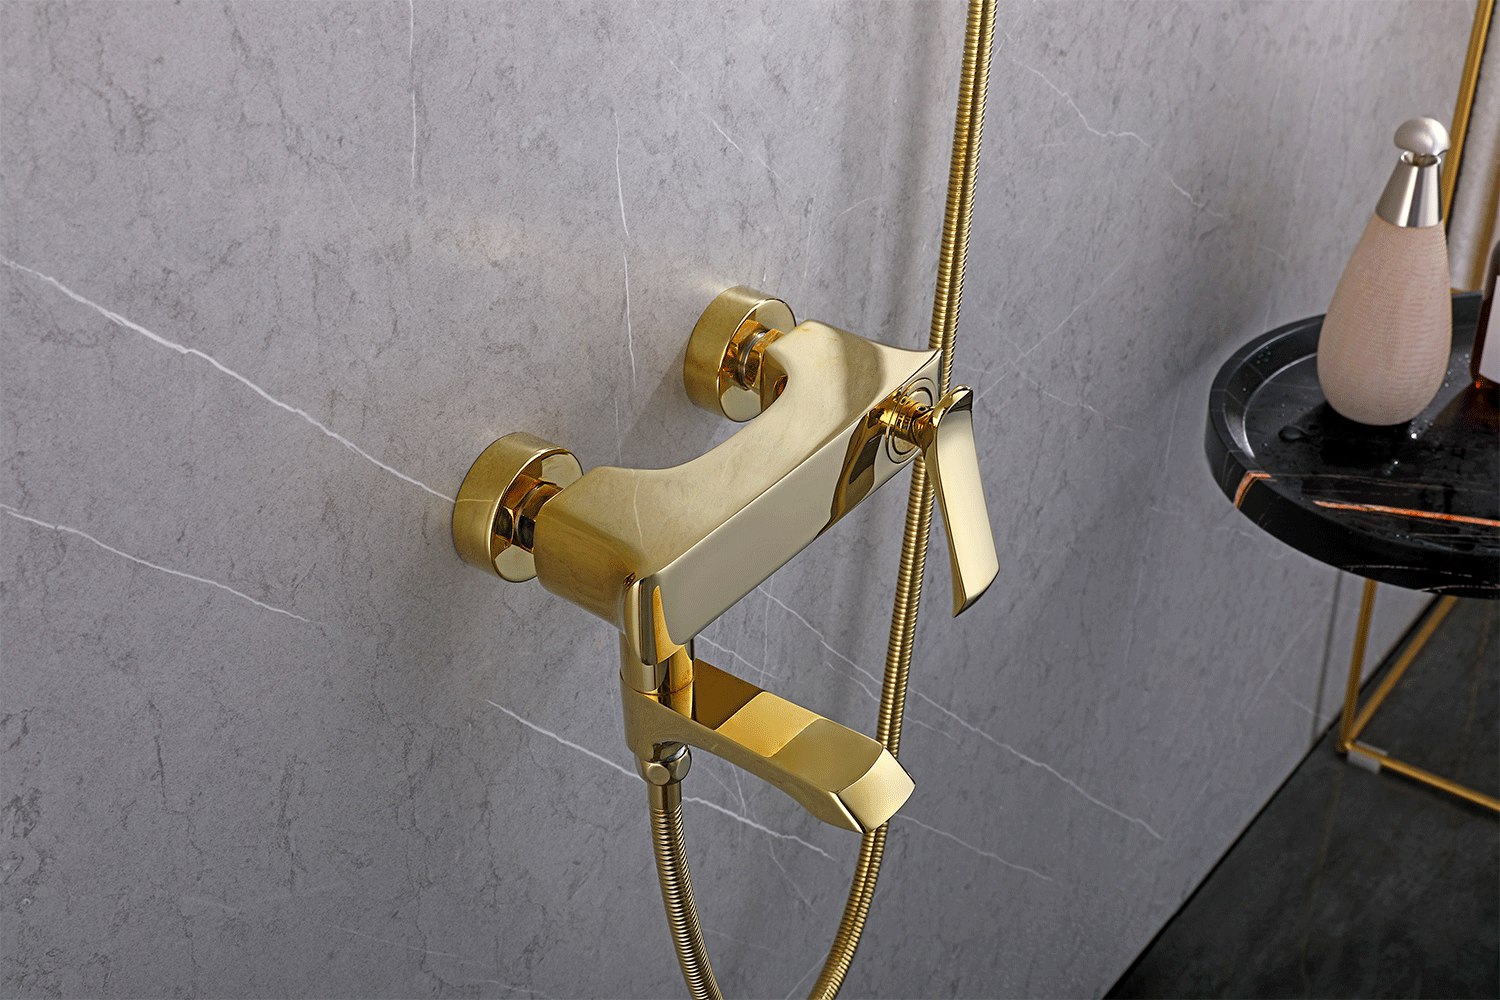 Solid Brass Exposed Shower Mixer